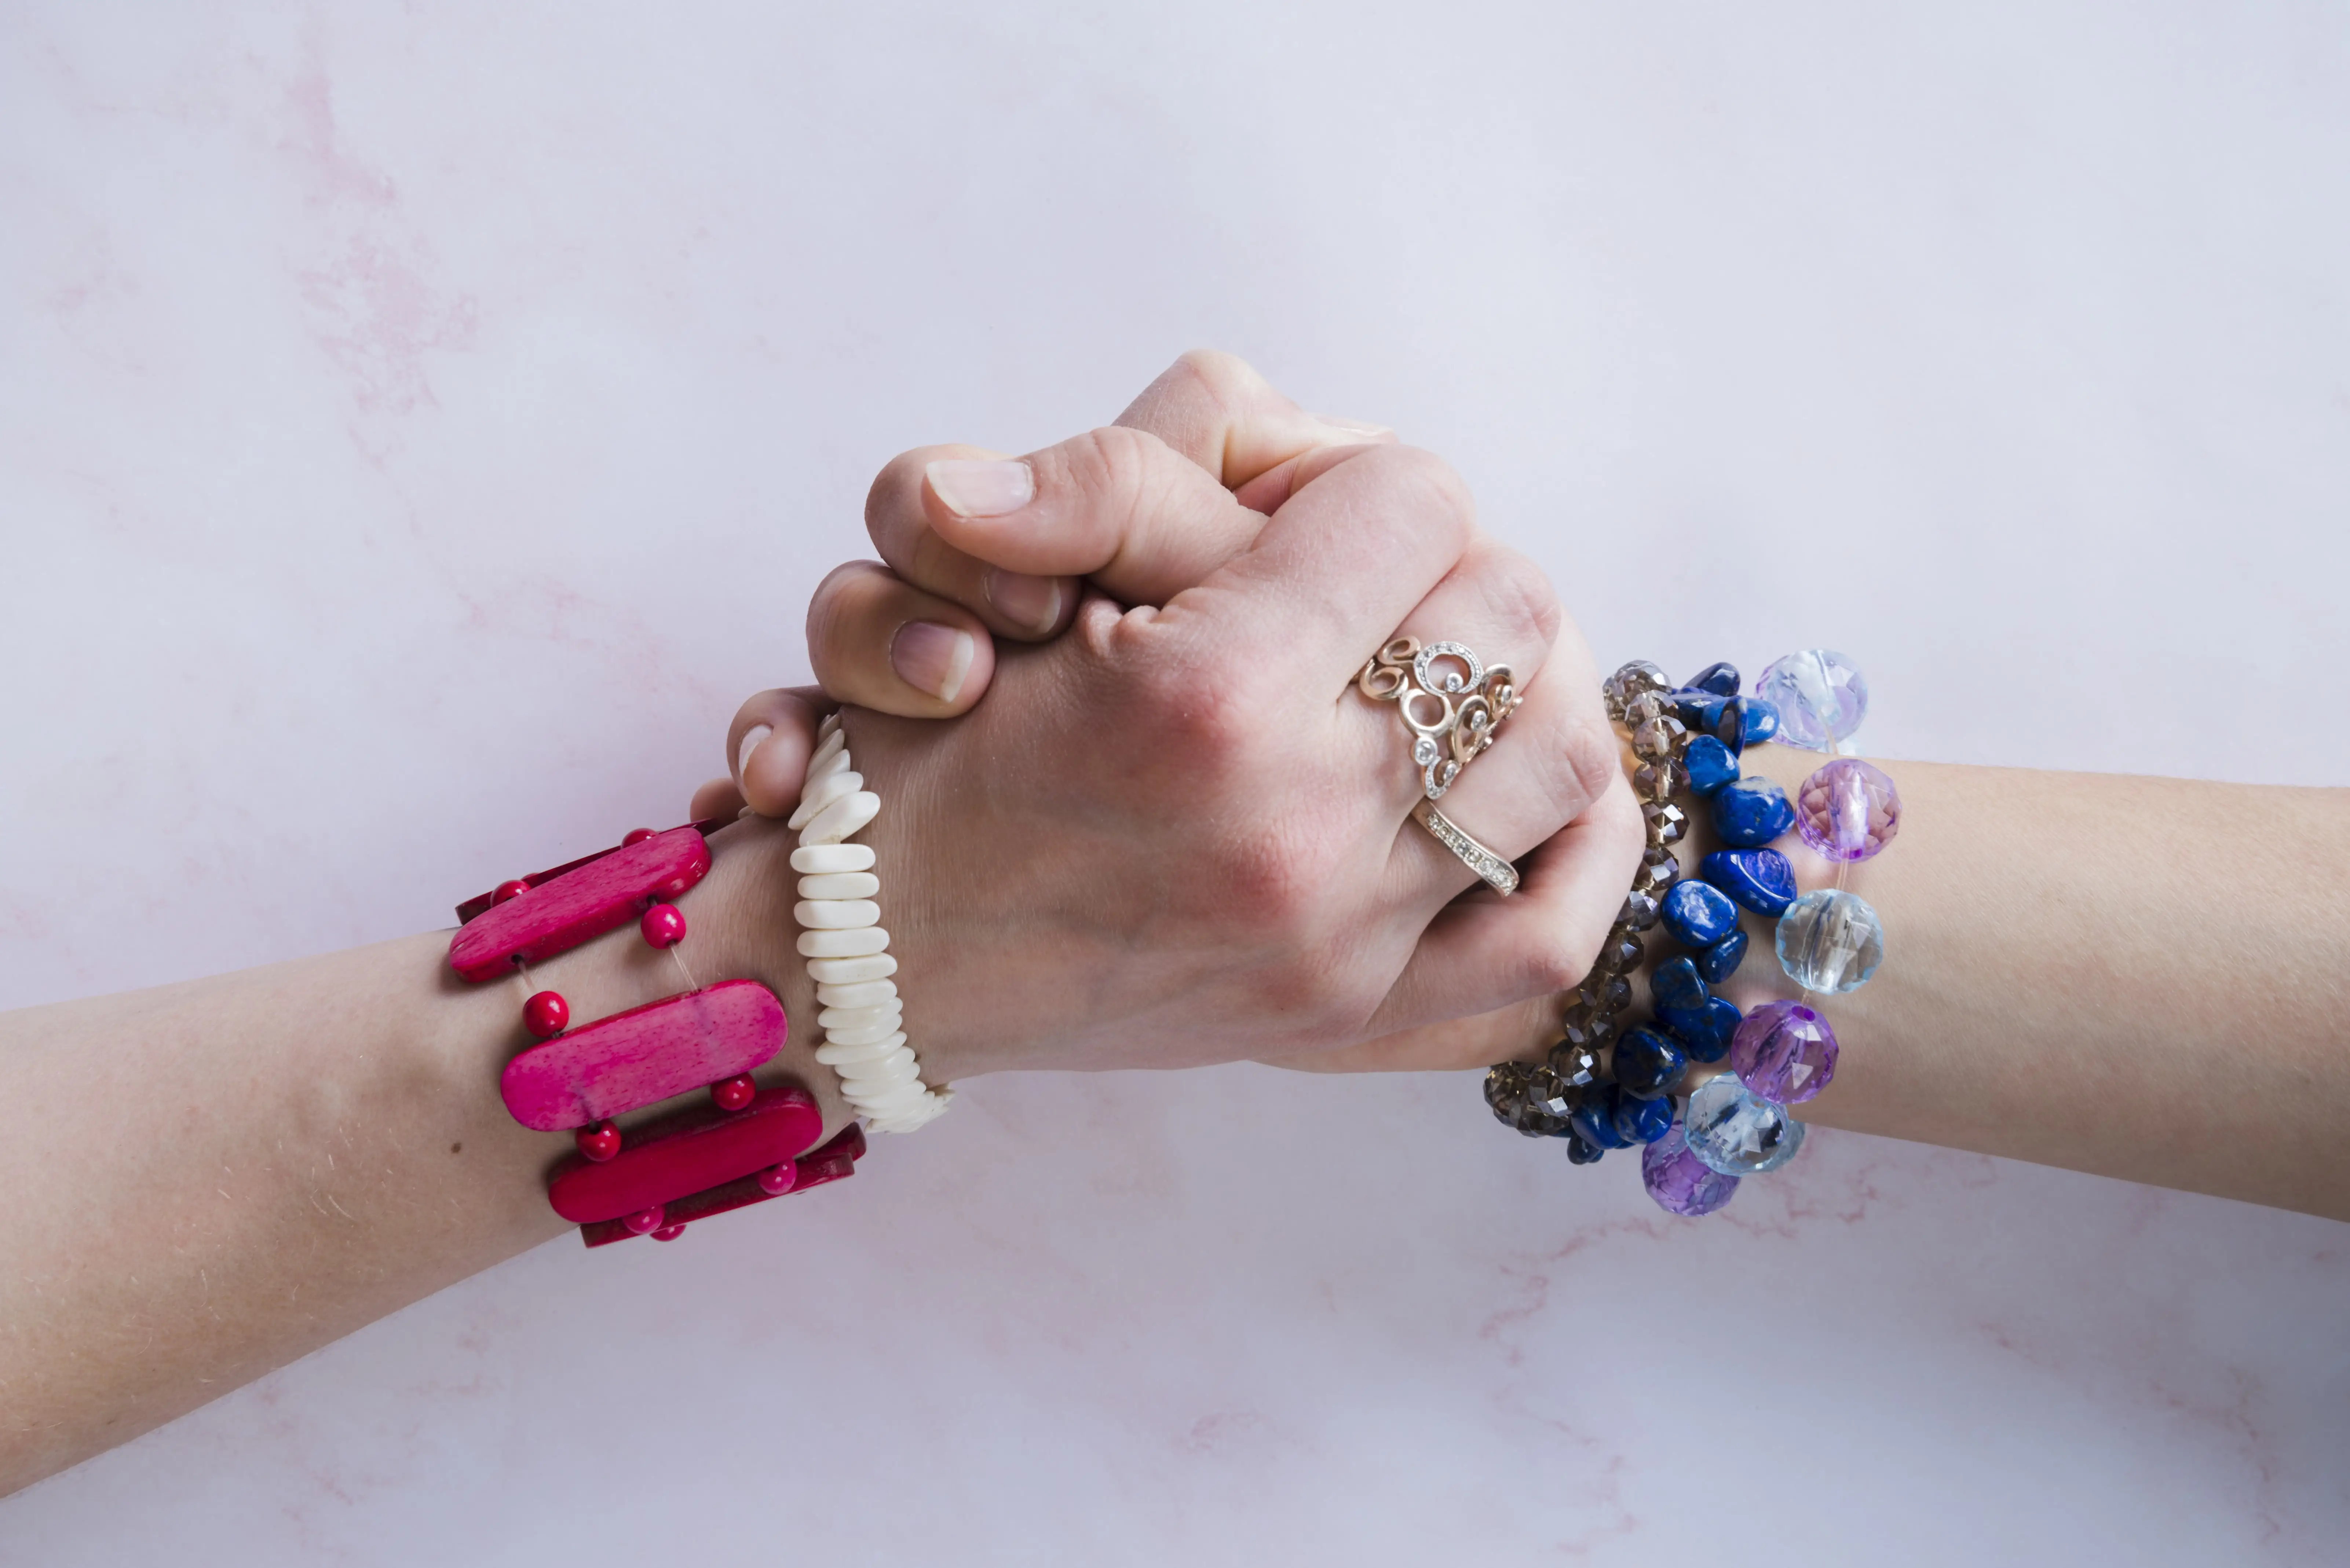 Women with beautiful colorful bracelets shake hands